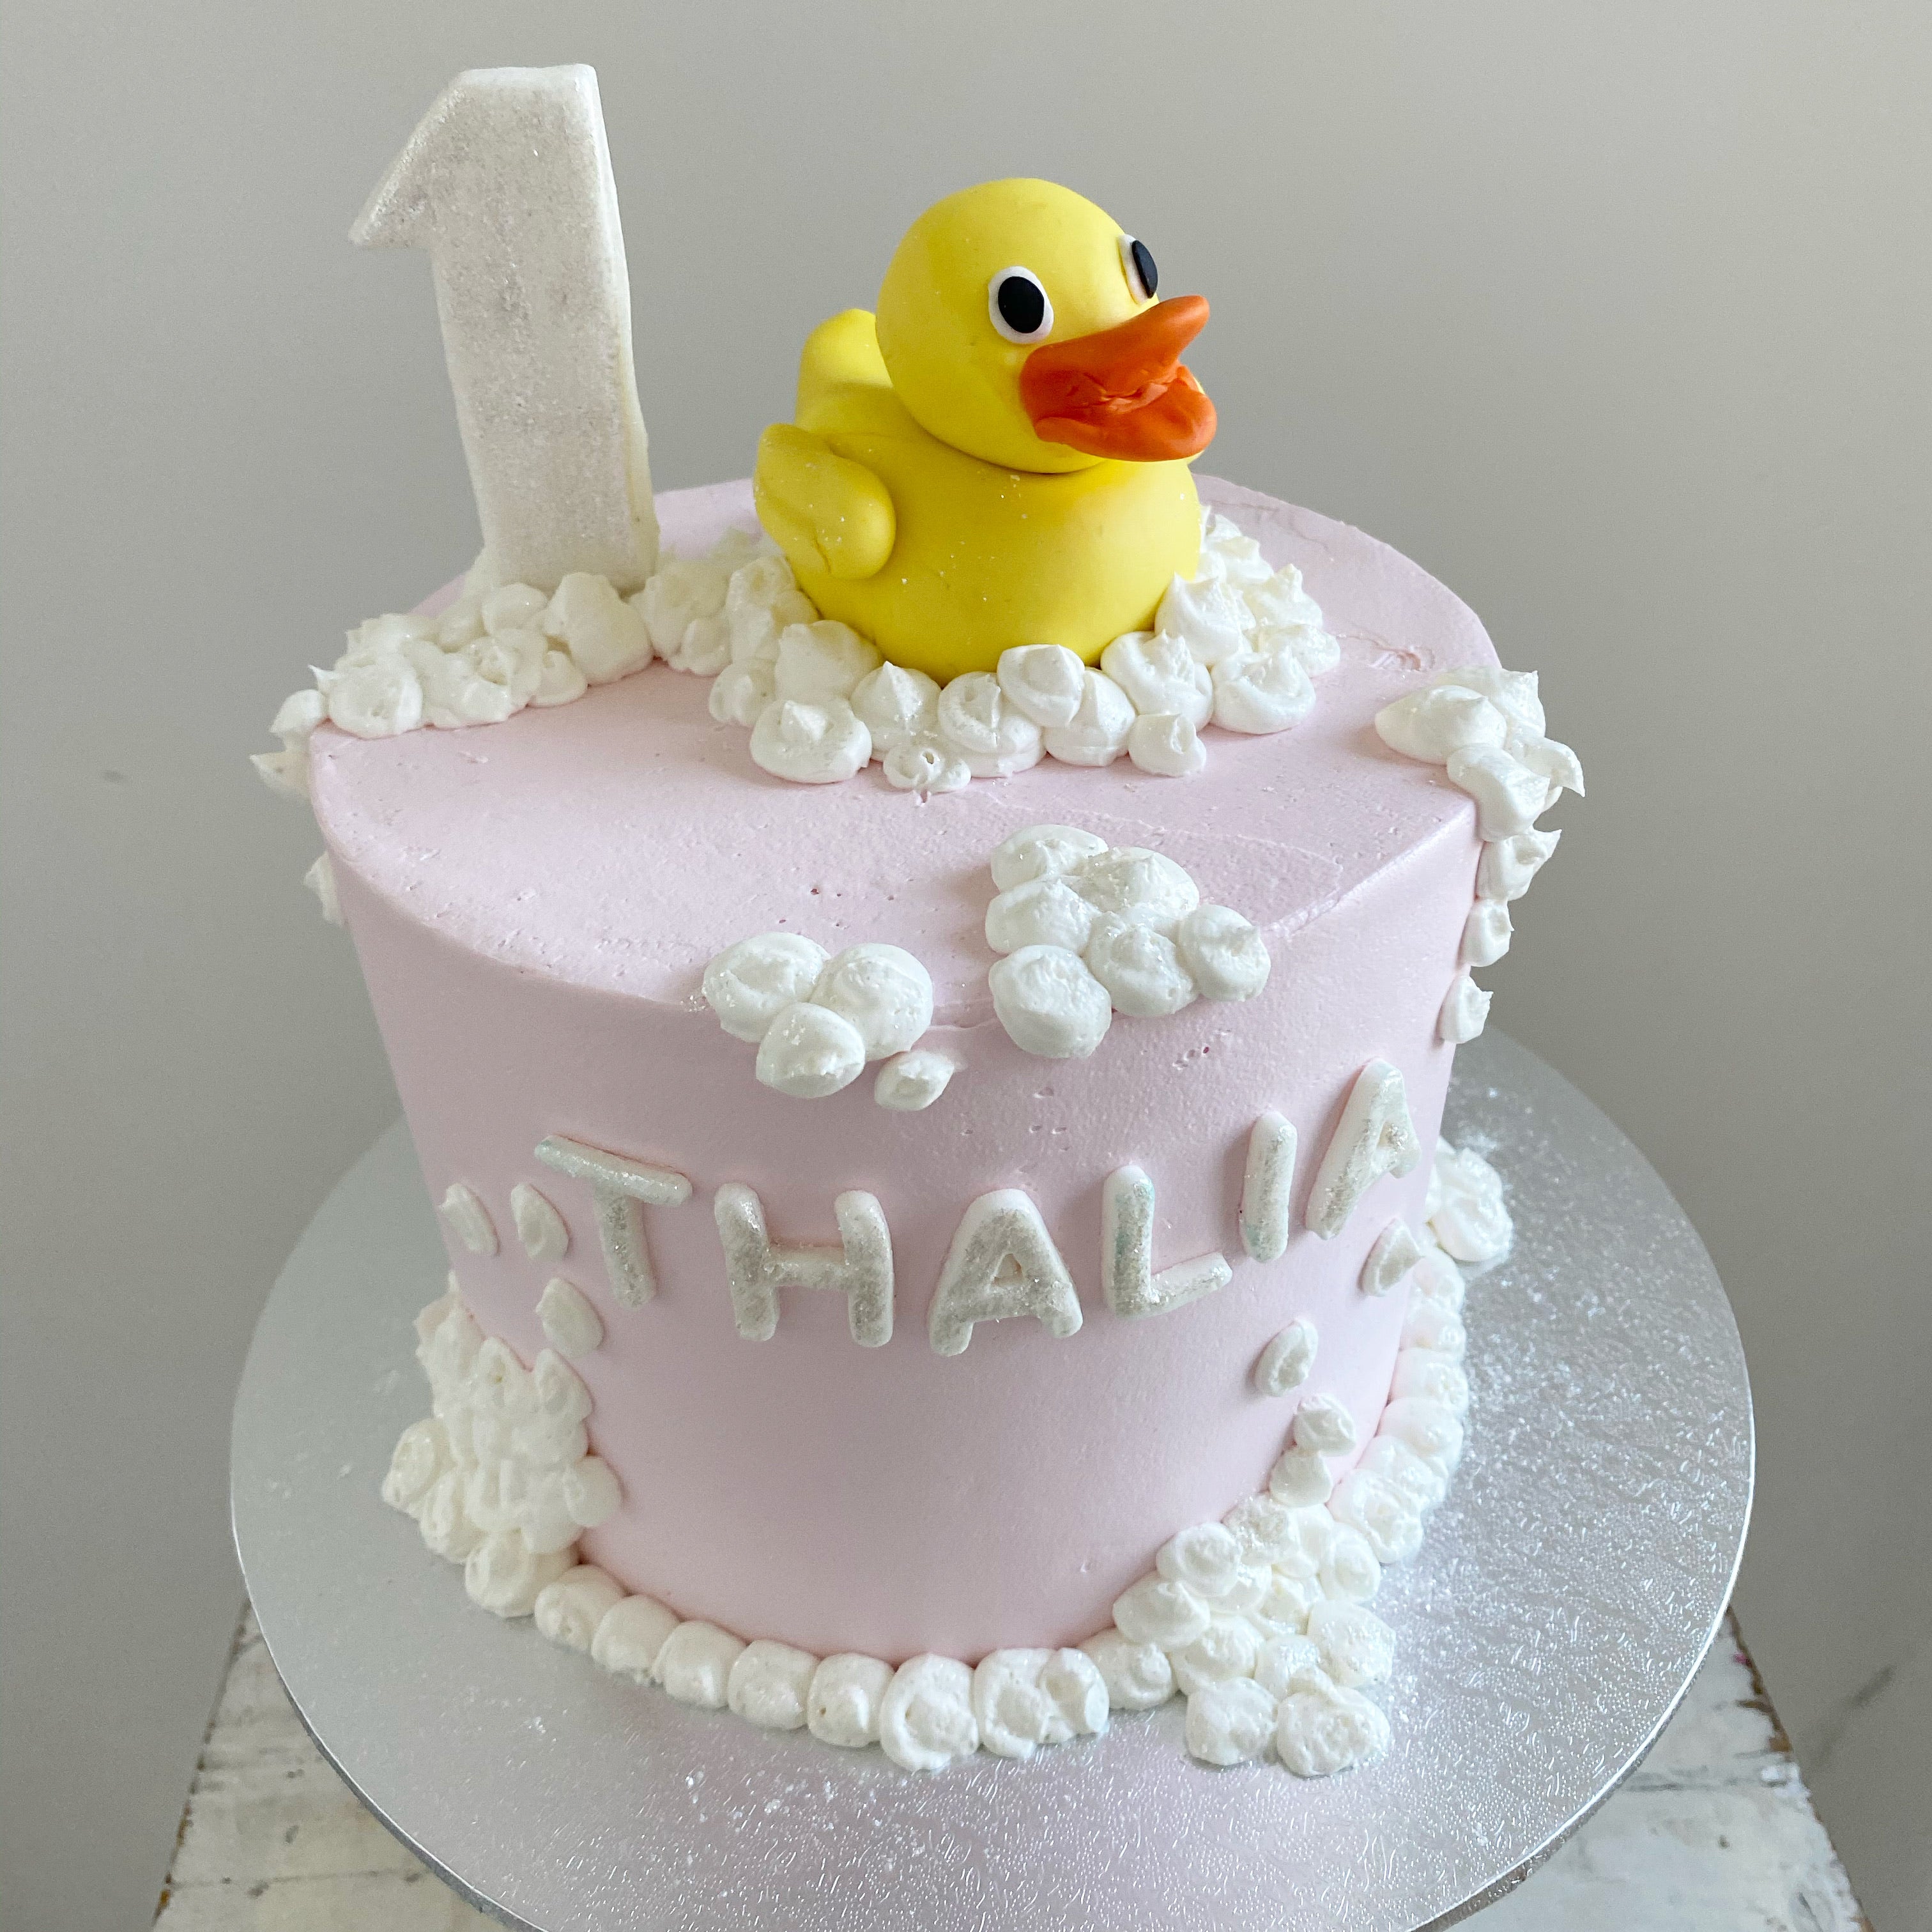 Birthday cakes online delivery - Cake with Donald duck design - Cartoon  Shape Cakes - Cake from Yummy Yummy